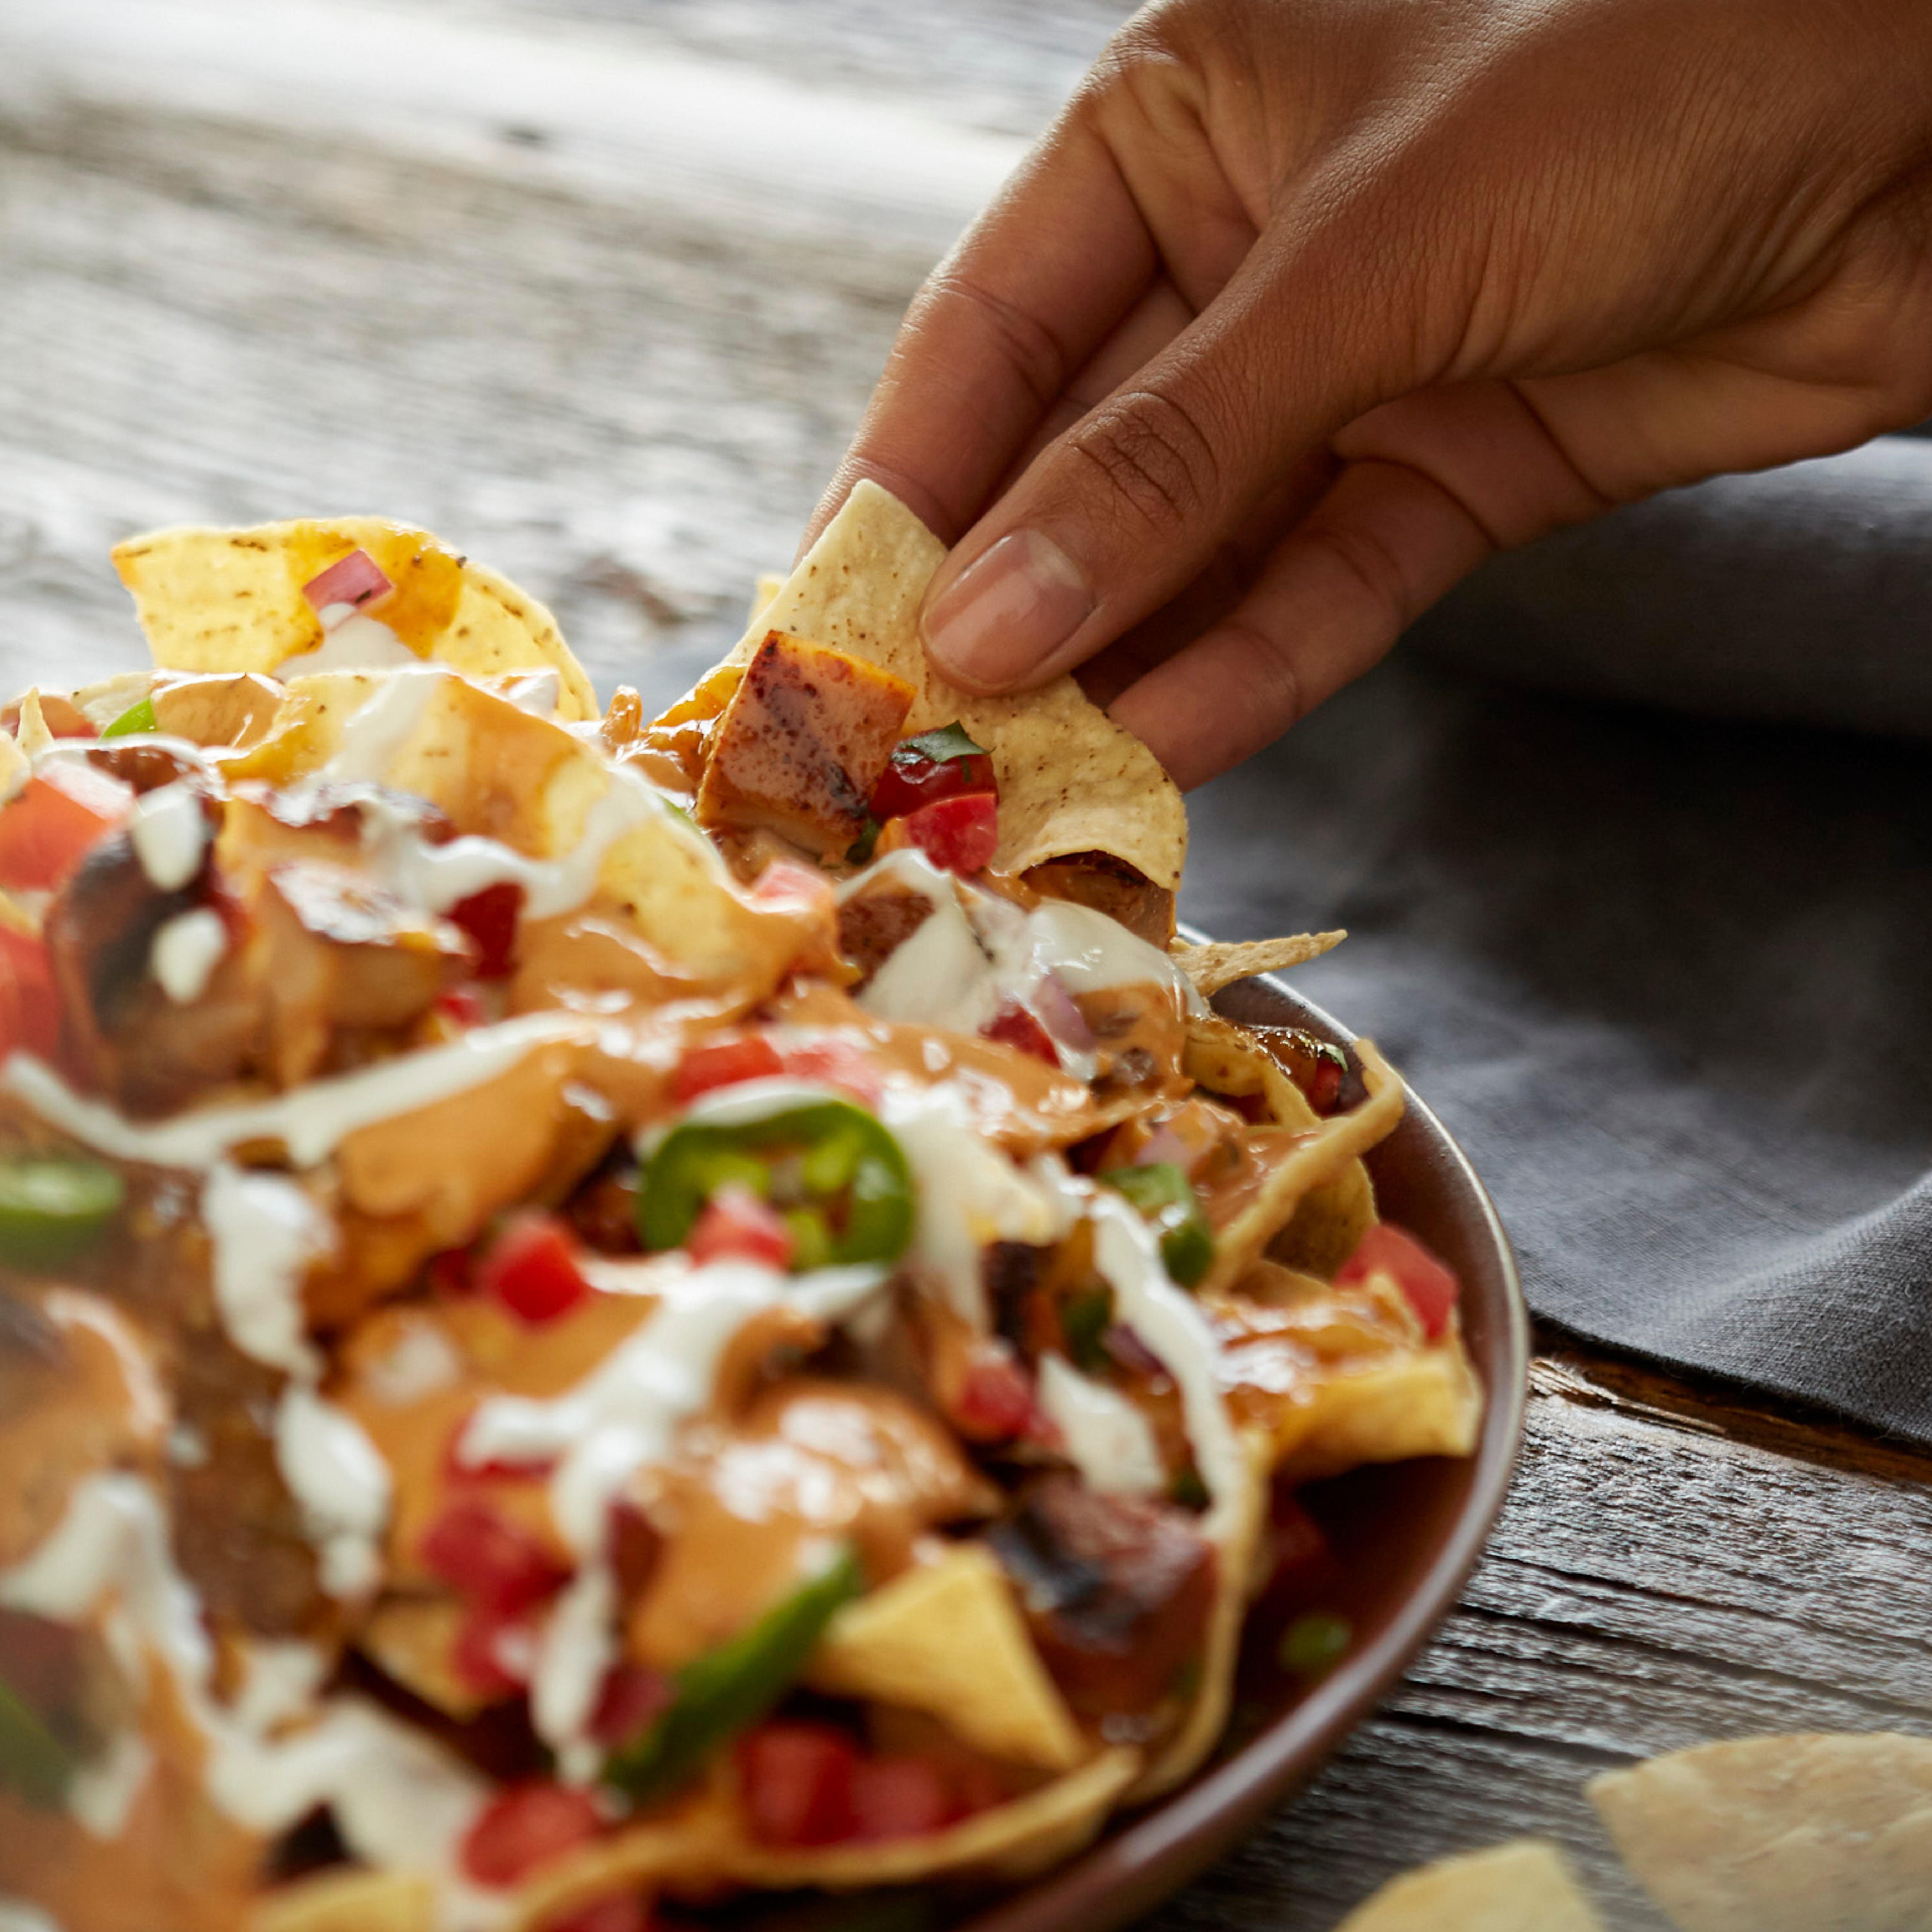 Nachos can be loaded with grilled adobo chicken, house-made pico de gallo and QDOBA's signature 3-cheese queso, free on any entrée!